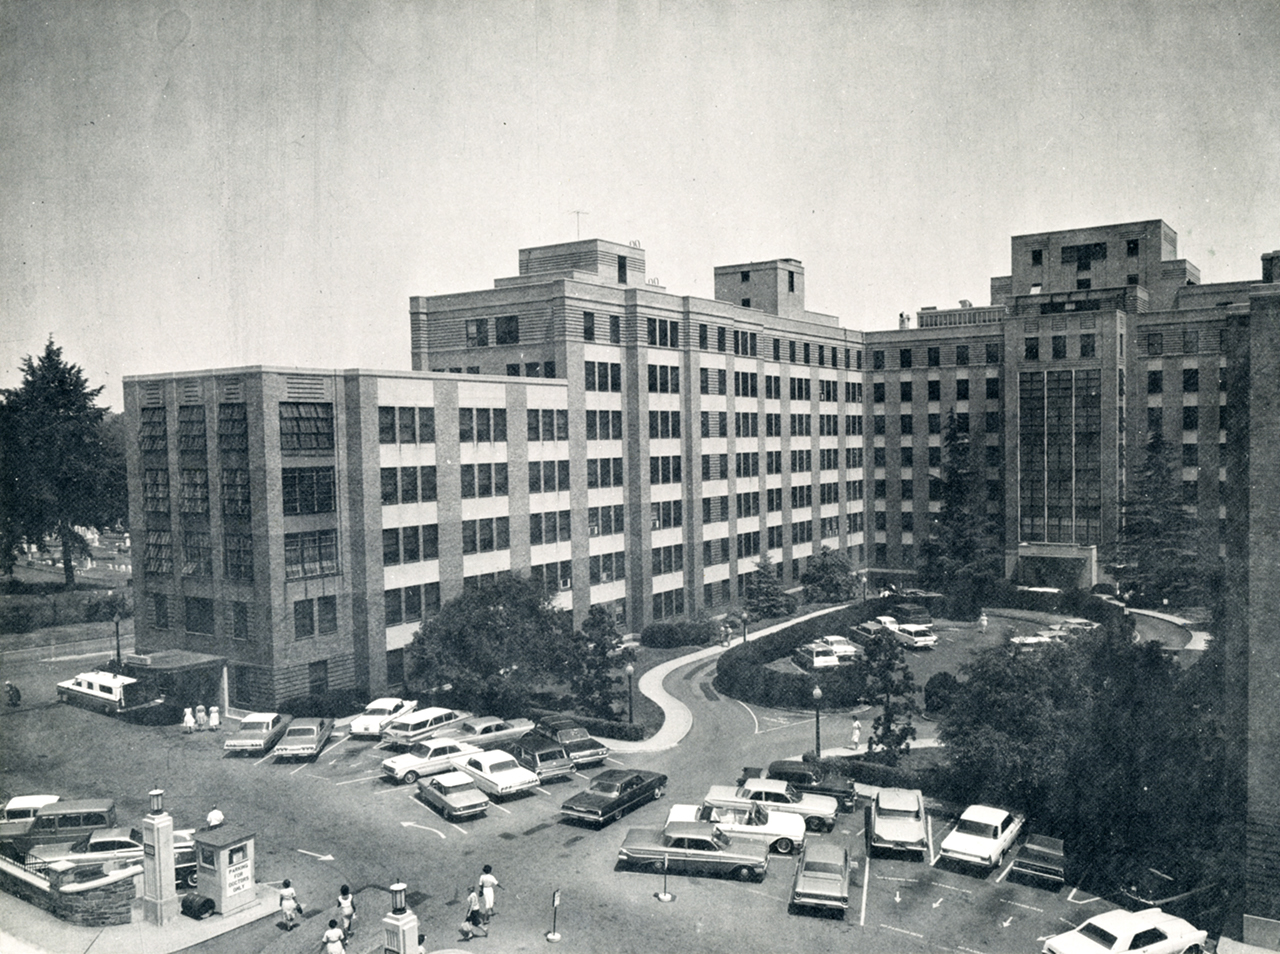 An external view of Delaware Hospital in the 1960s